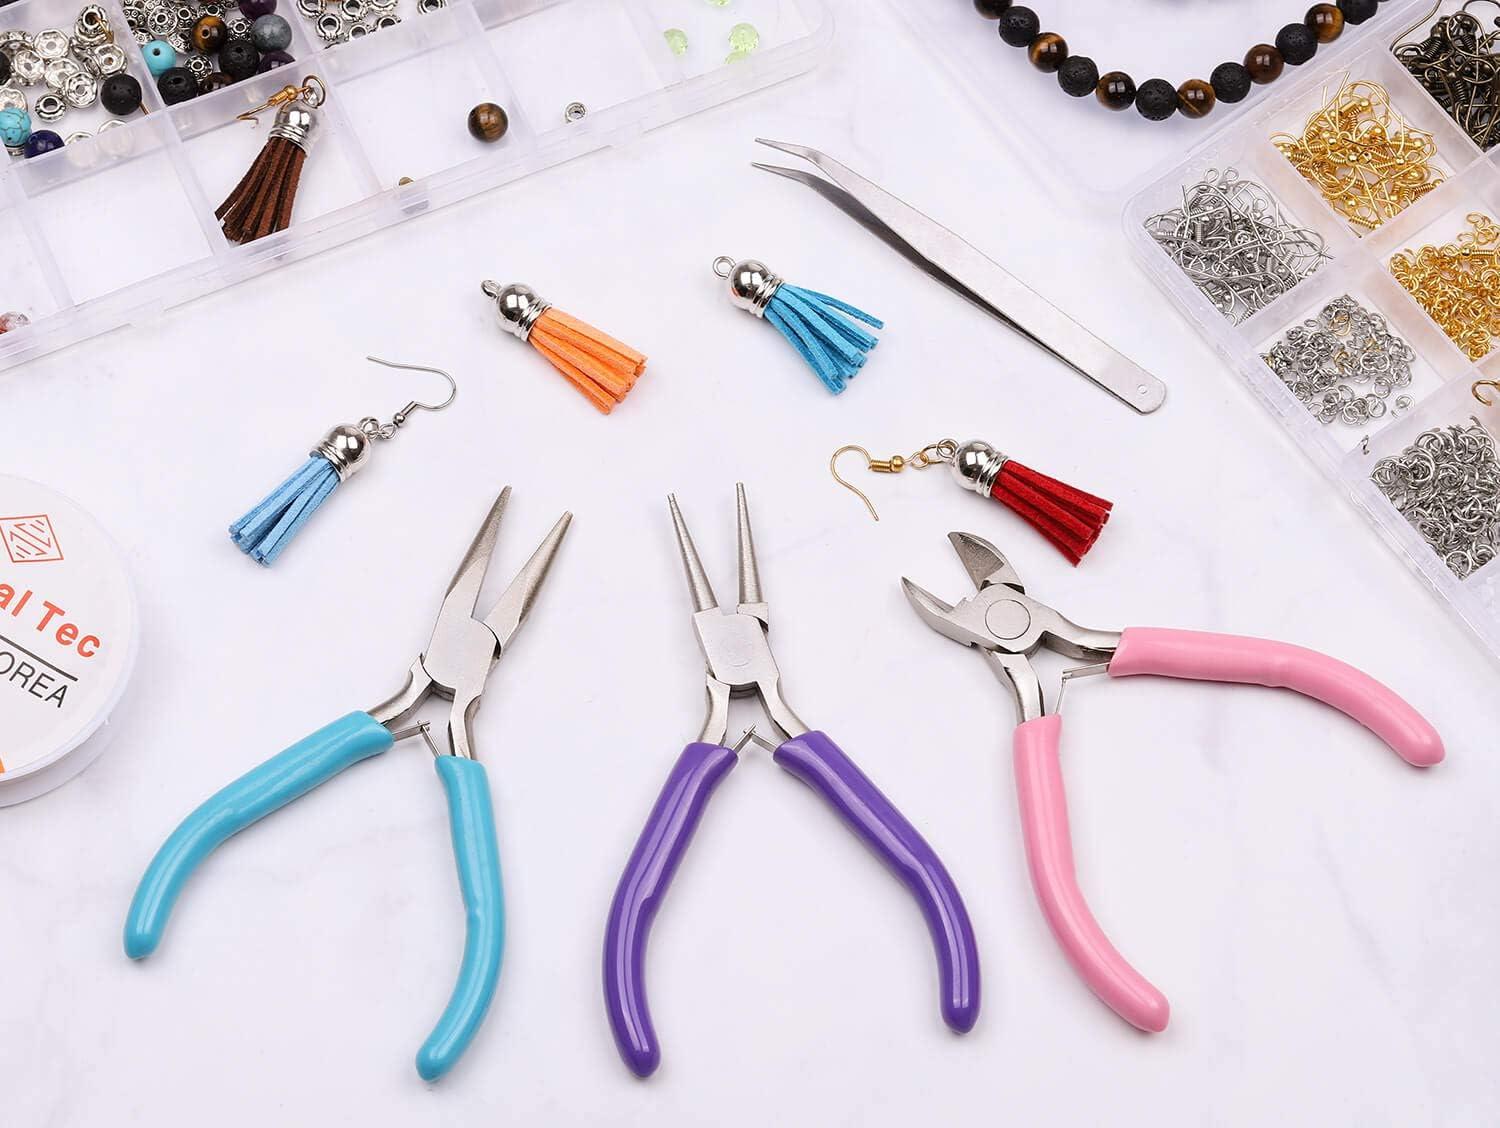 Glarks 1616Pcs Making Supplies Kit with Jewelry Tools, Includes Pliers,  Jewelry Wires, Charm Pendants, Jewelry Findings for Jewelry Making and  Repair